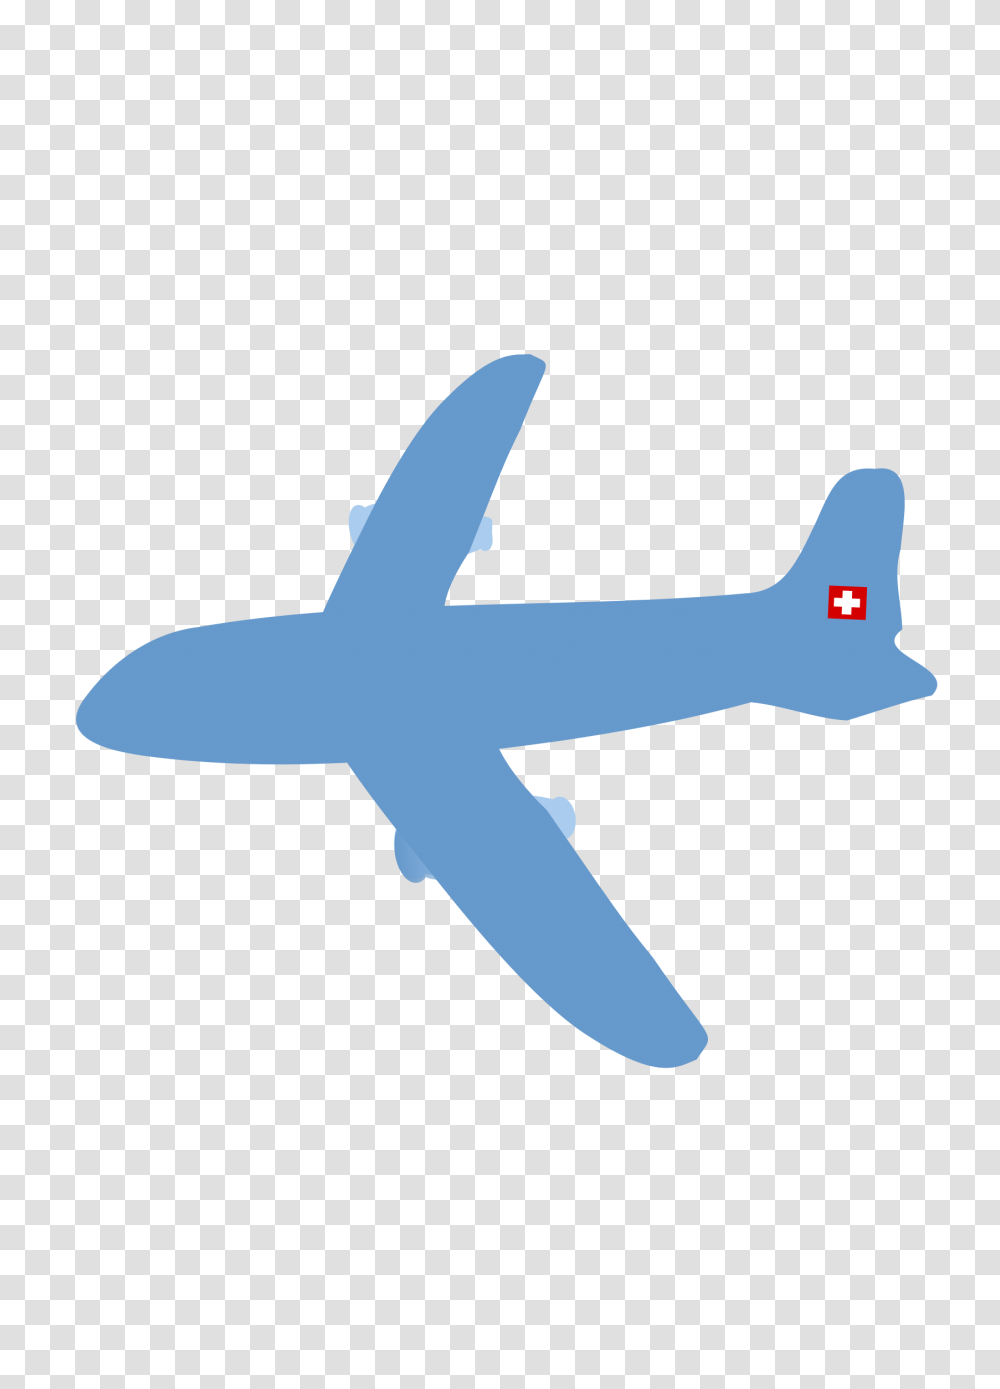 Hd Aircraft Clipart Plane Airplane Clipart No Background, Vehicle, Transportation, Airliner, Takeoff Transparent Png